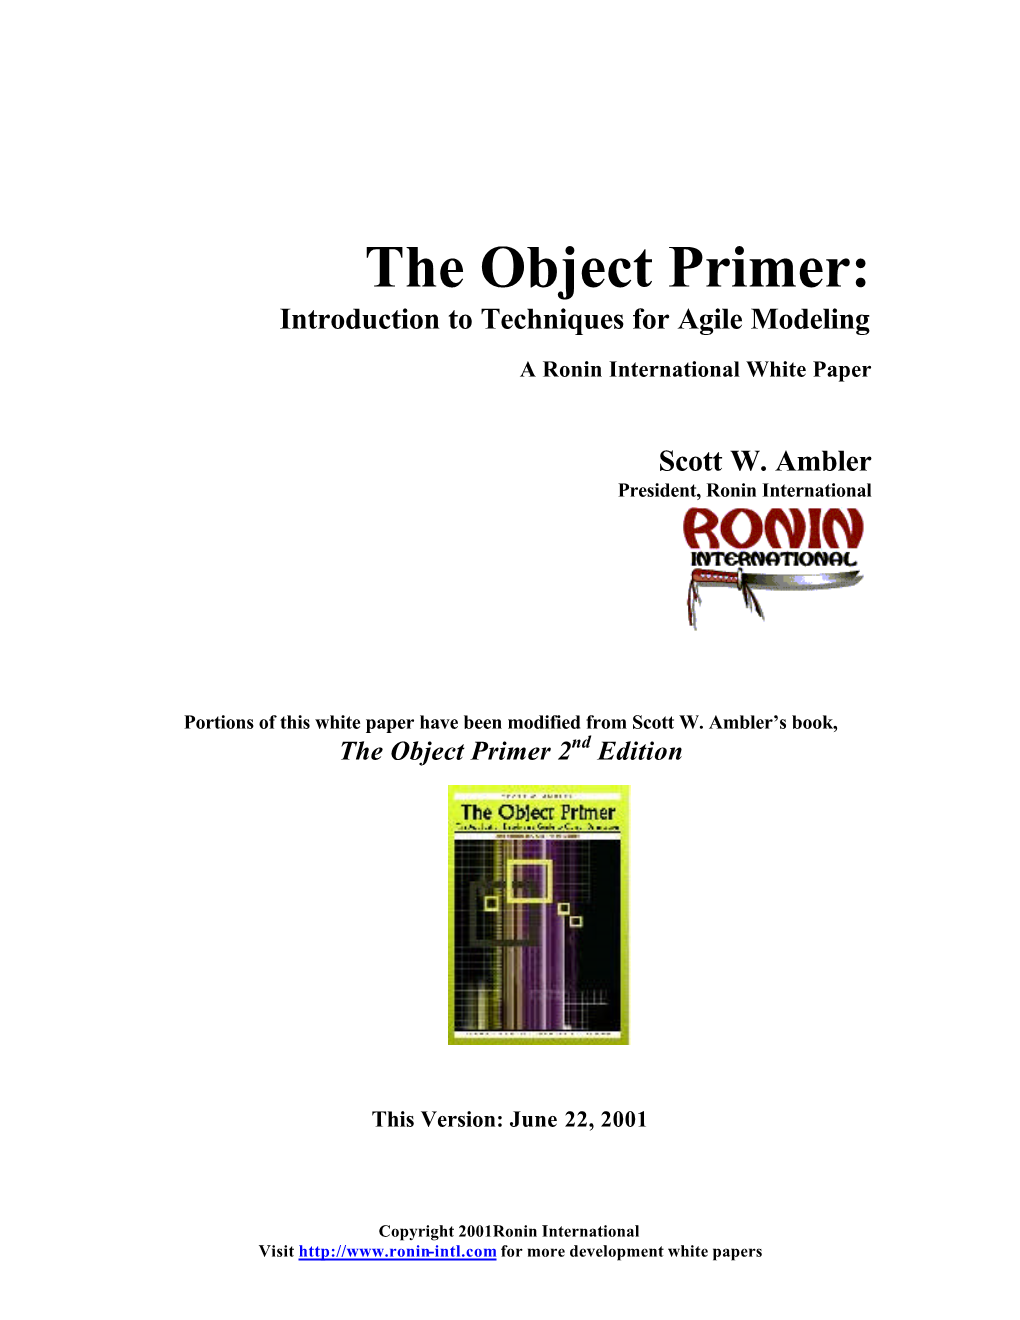 The Object Primer: Introduction to Techniques for Agile Modeling